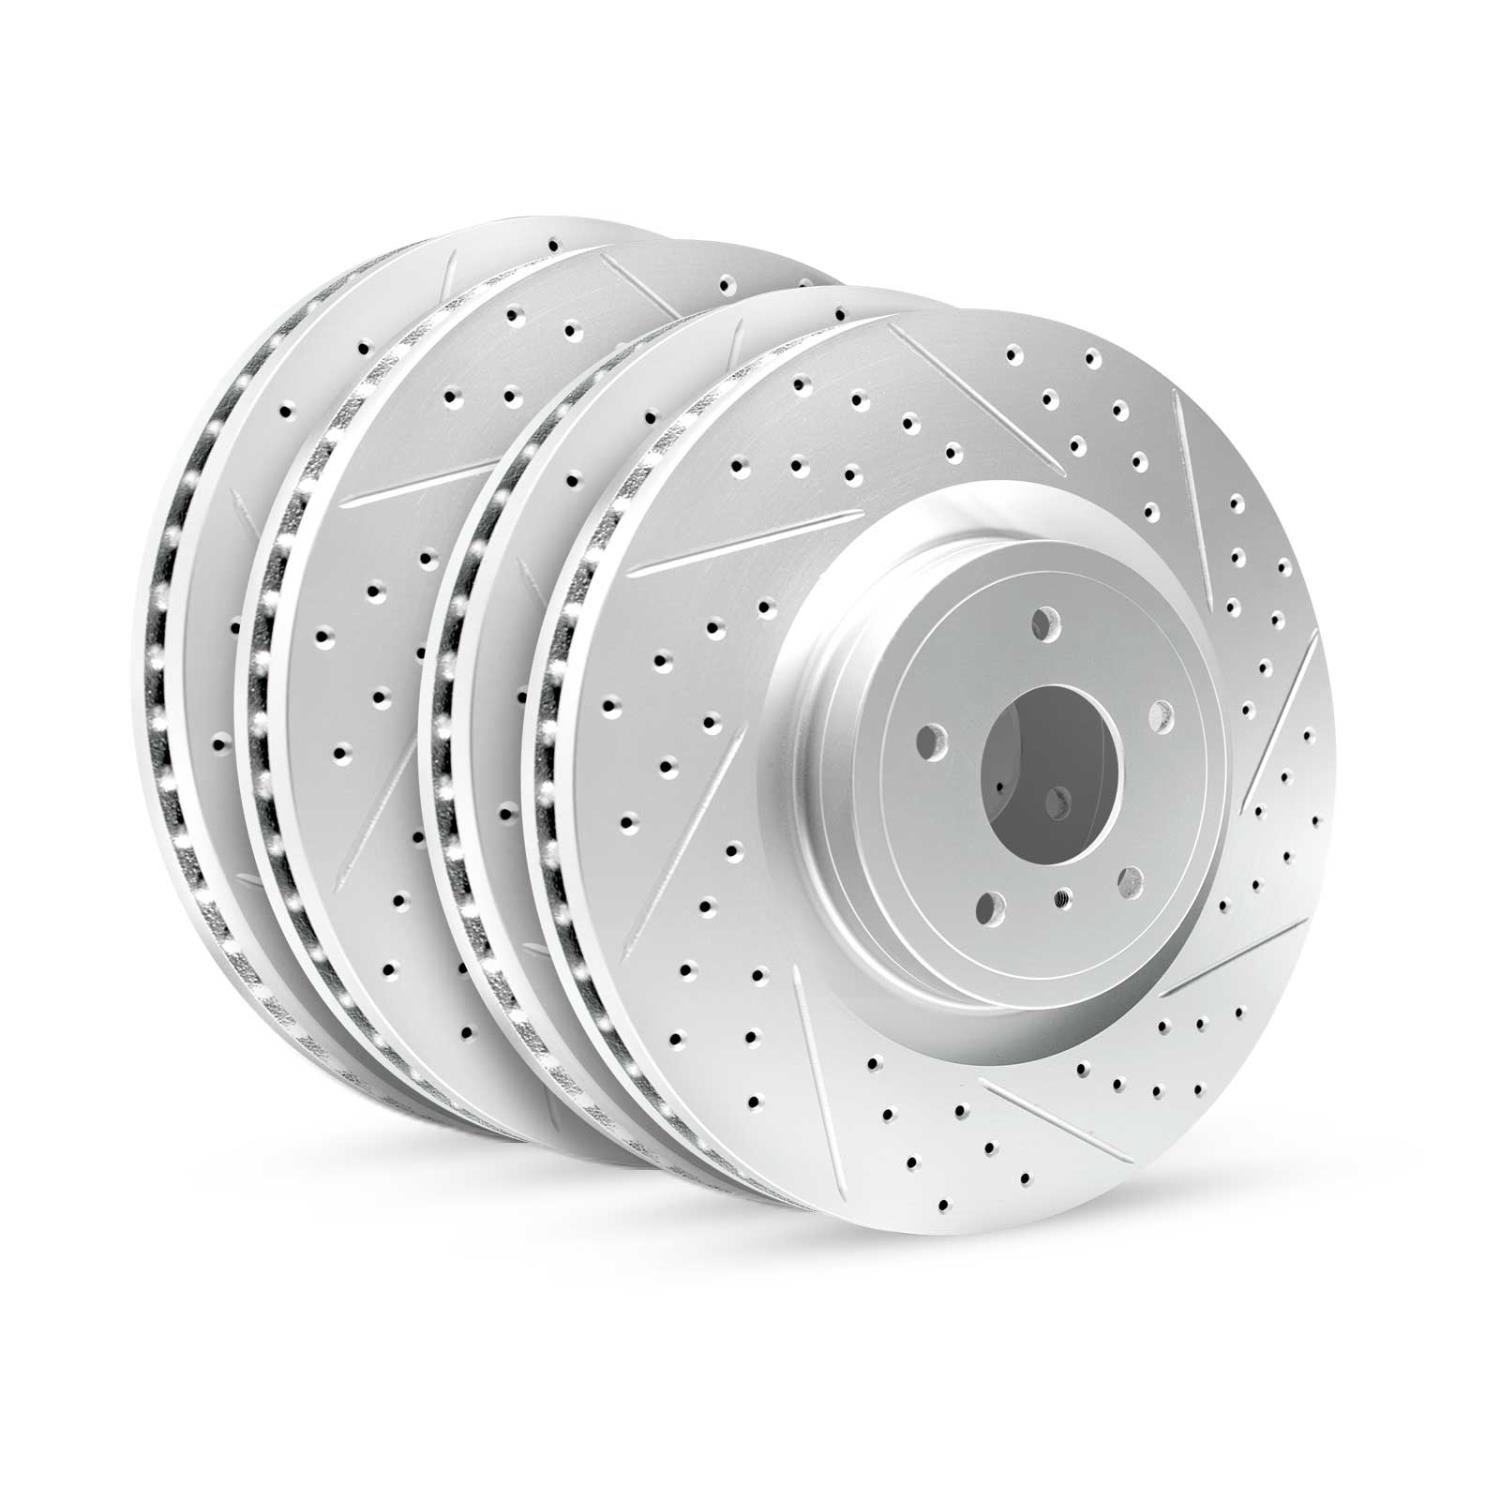 GEO-Carbon Drilled/Slotted Rotors, 2006-2015 Lexus/Toyota/Scion, Position: Front/Rear